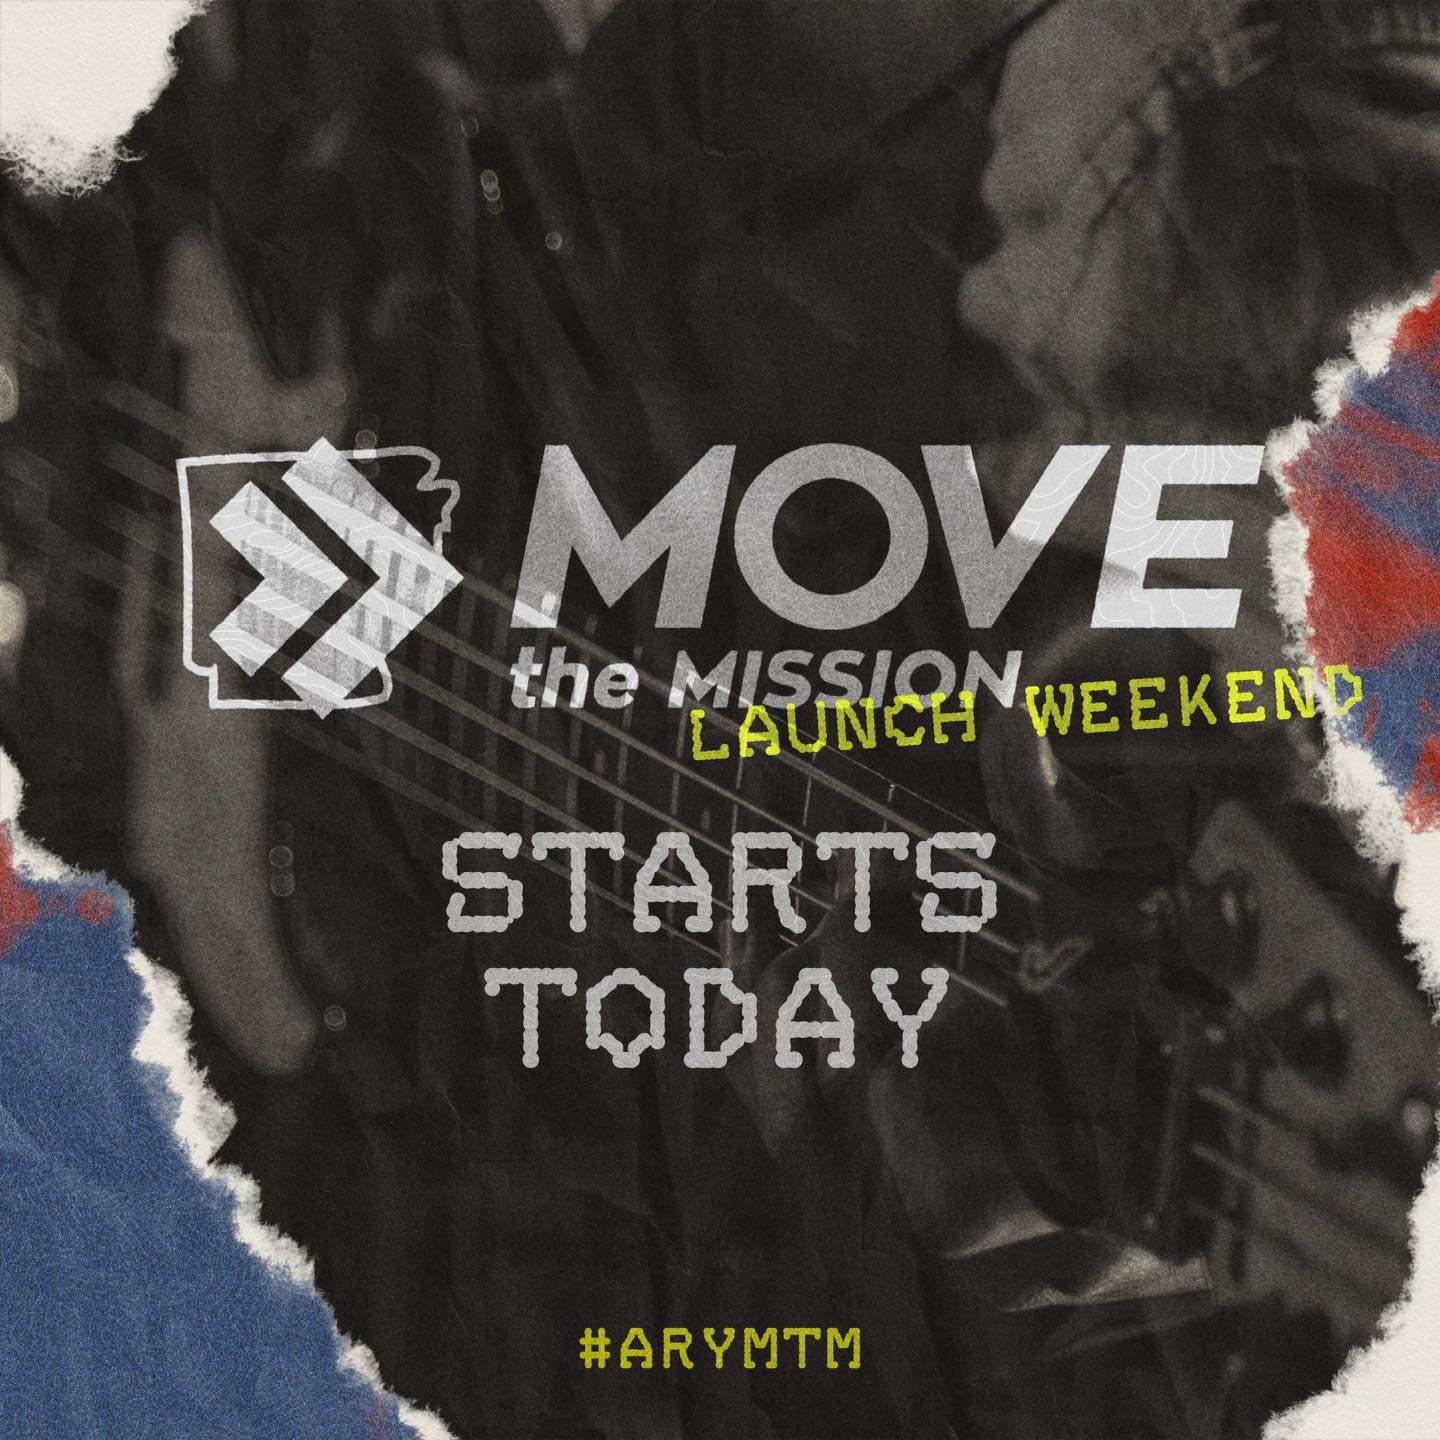 TODAY IS THE DAY❗️❗️

MOVE THE MISSION | LAUNCH WEEKEND 

10 Rallies | 10 Locations | 10 Sections

April 26 &amp; 27 🙌🏼🎉 

COMMENT YOUR SECTION BELOW 👇🏼👇🏼

#ARYMTM #ARYouth